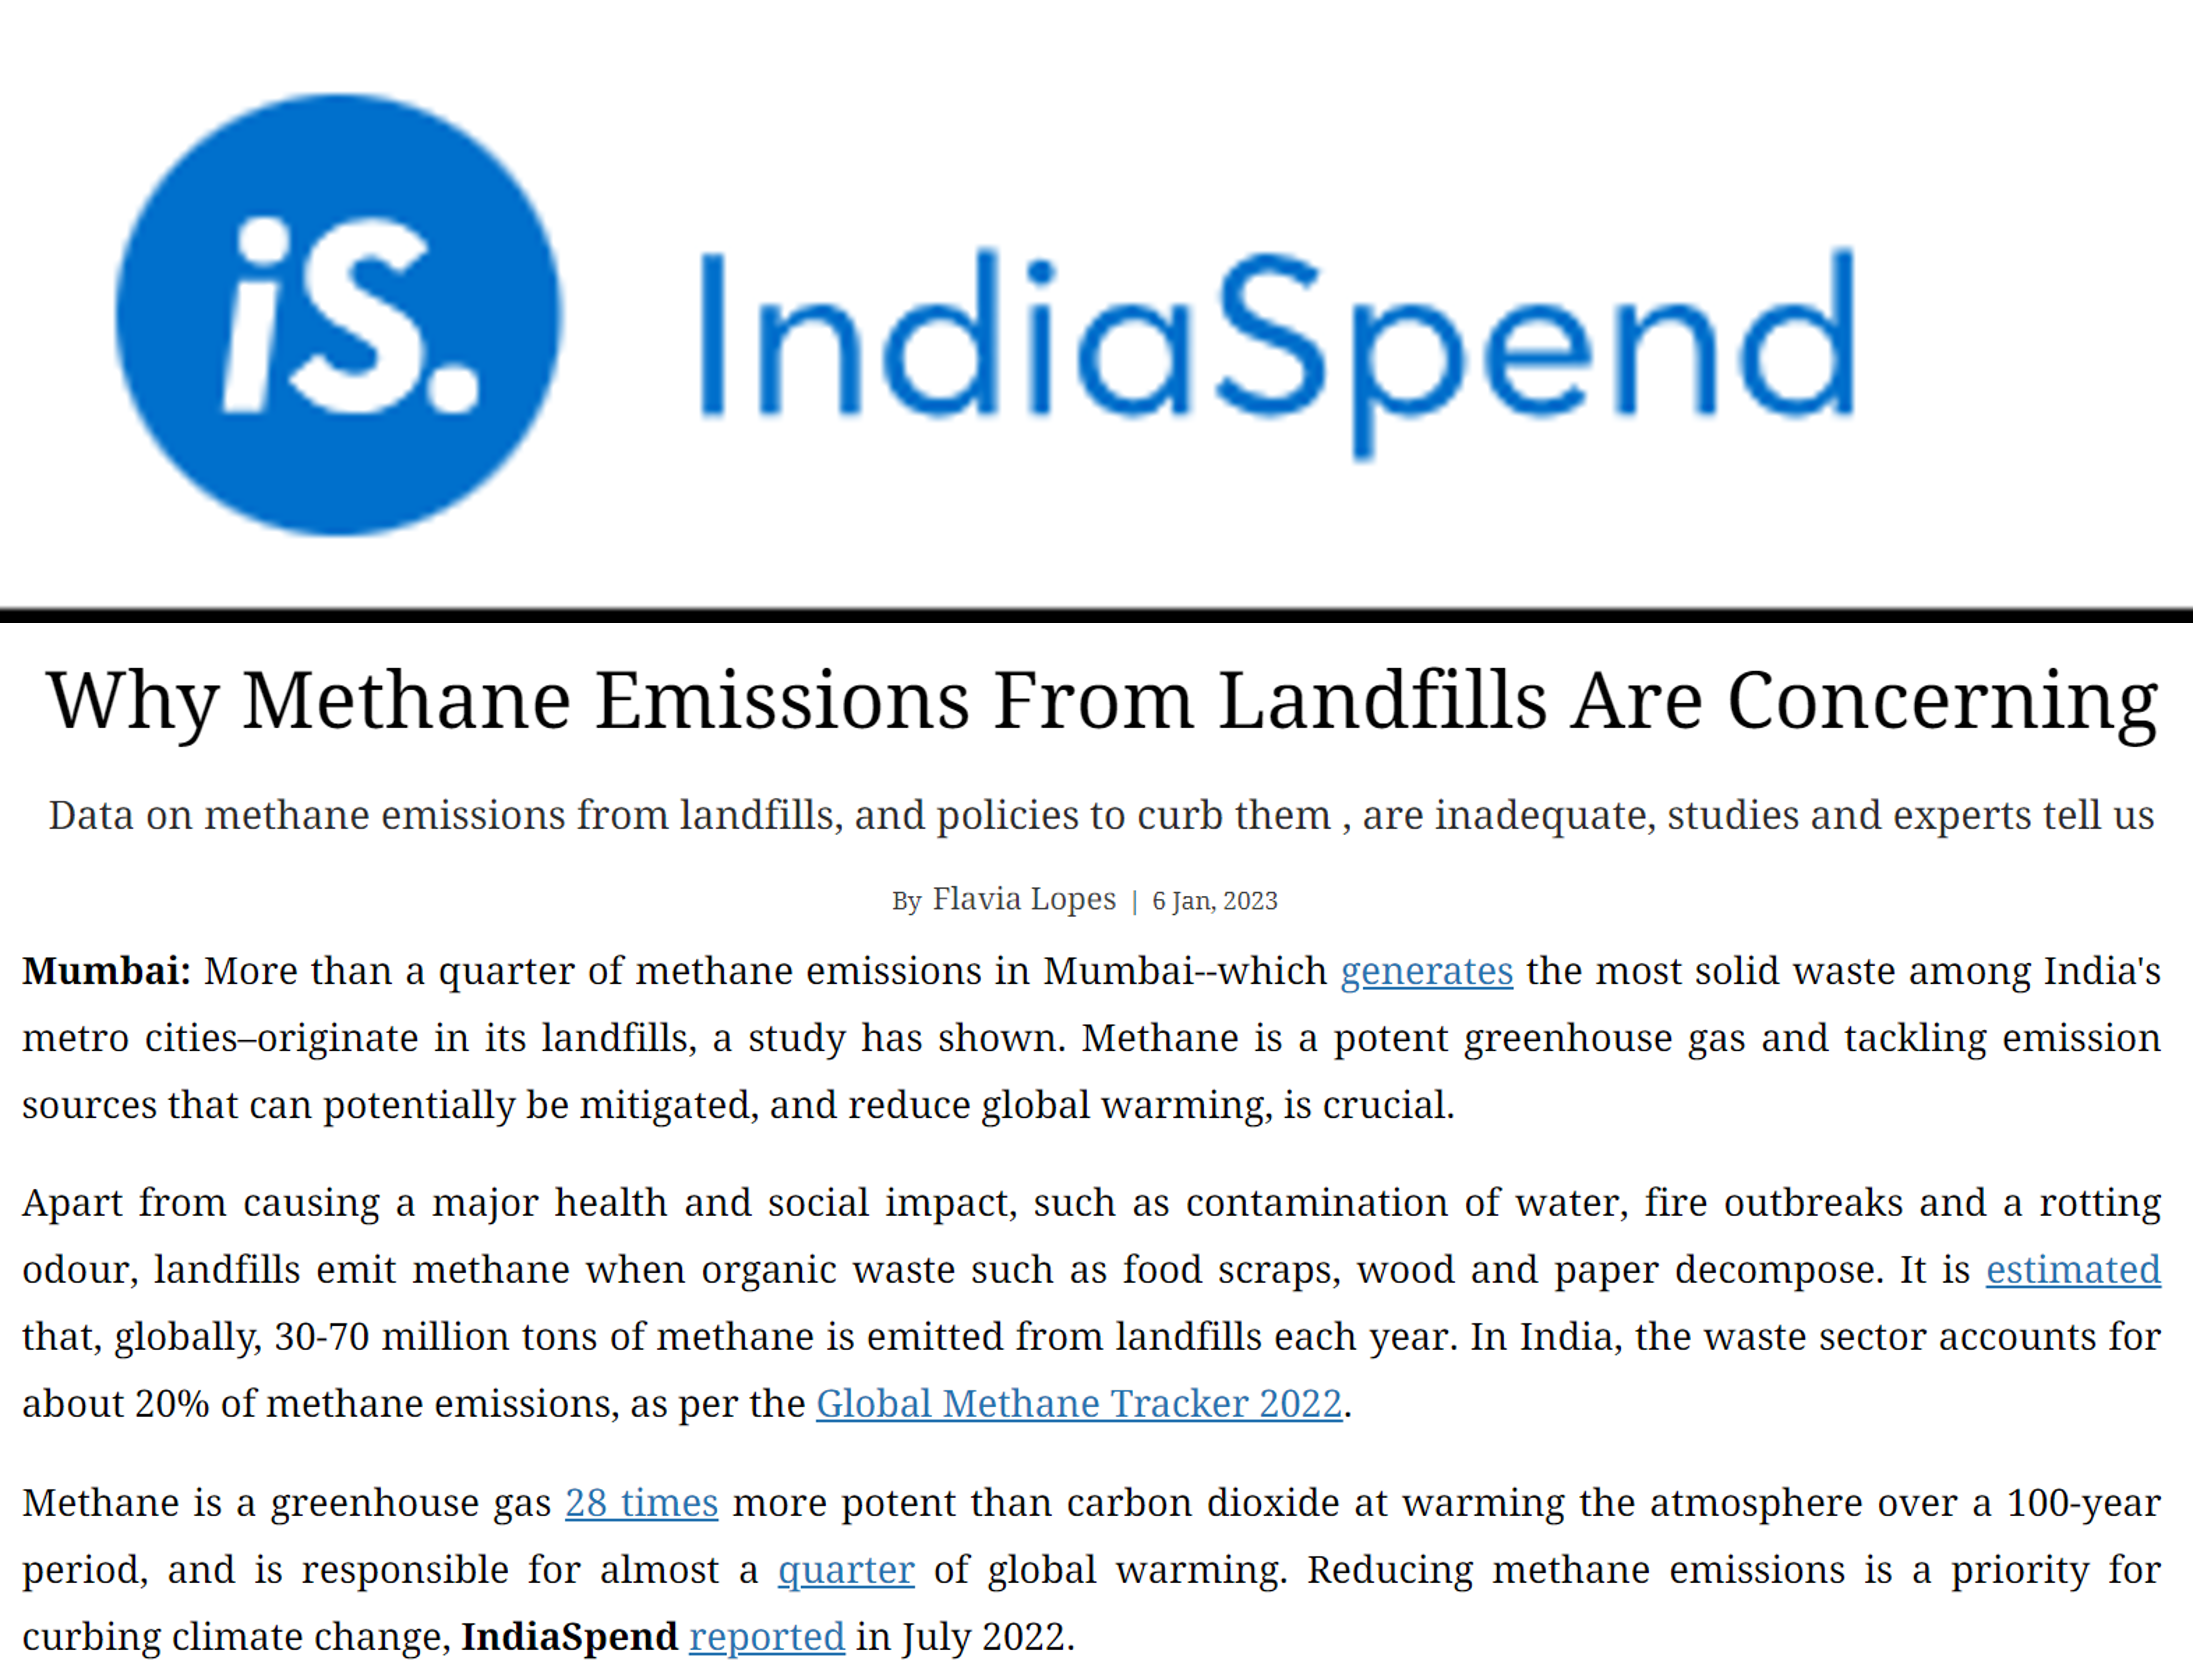 Pratima Singh quoted by India Spend on concerns regarding landfills